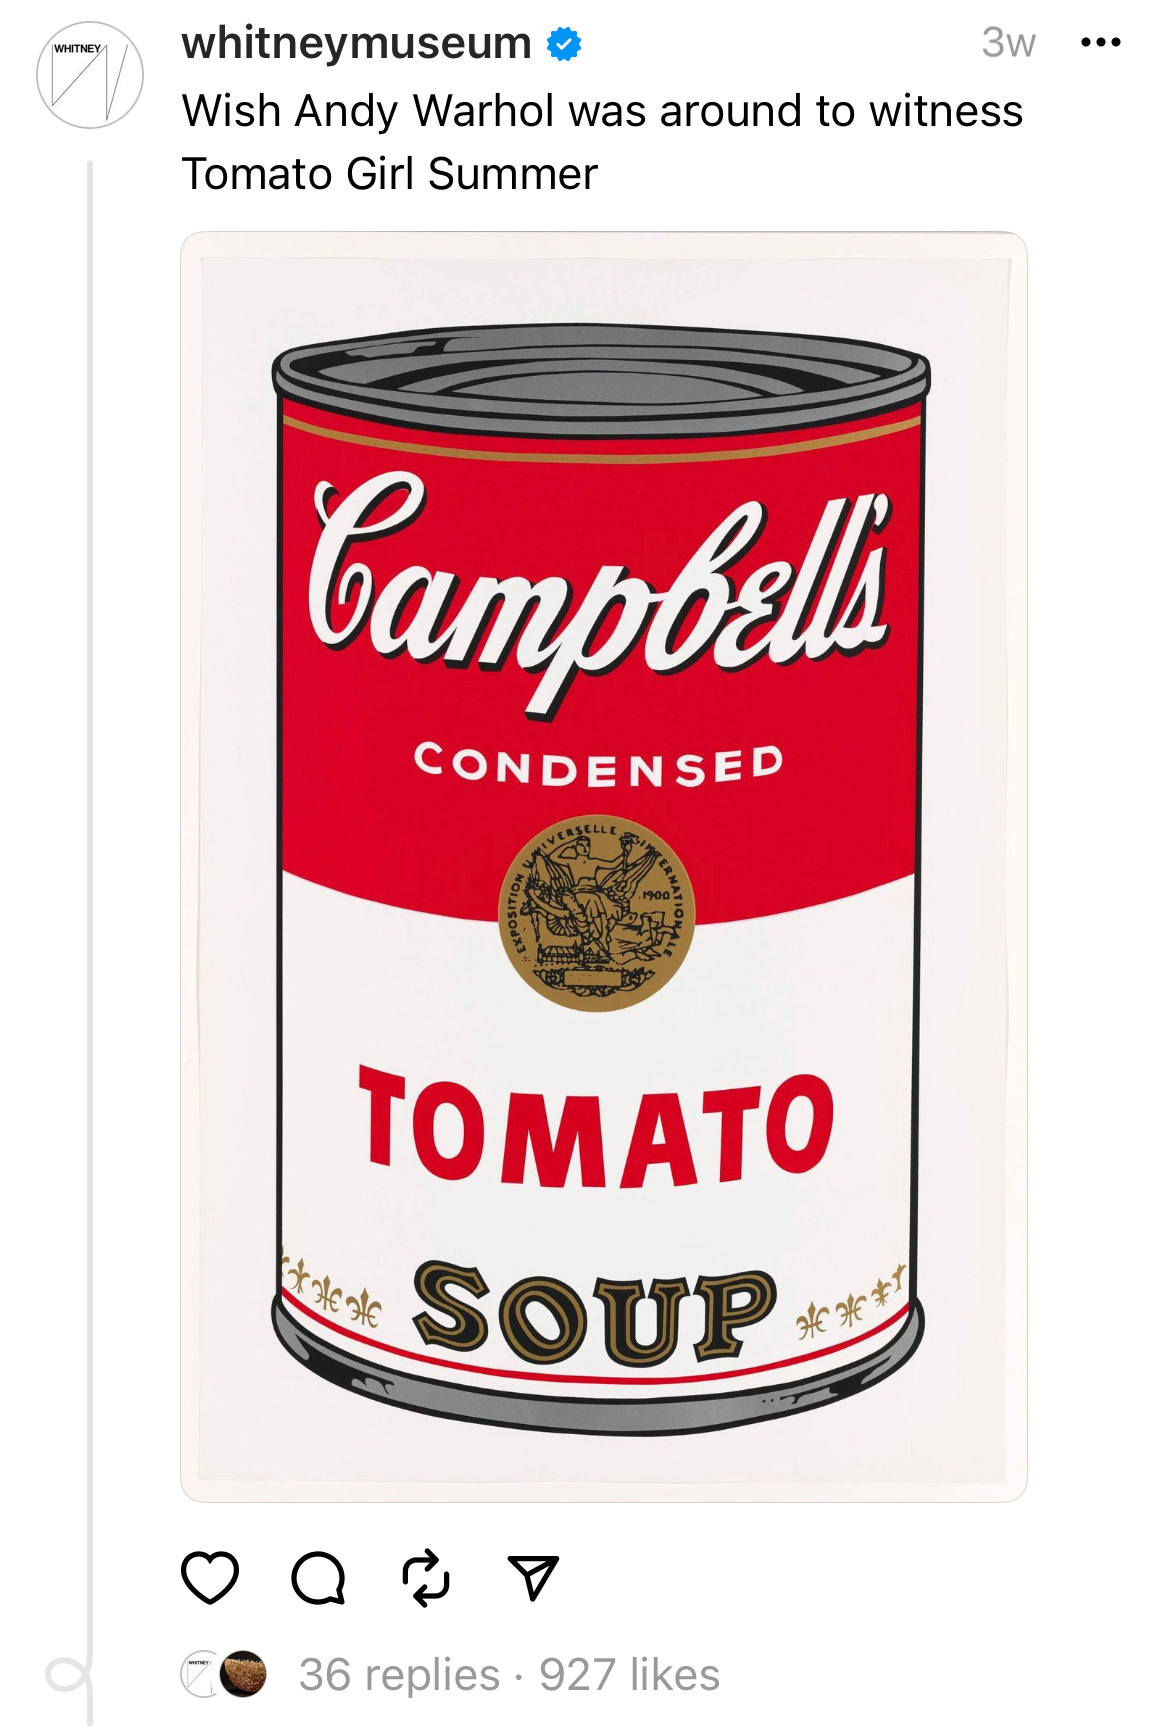 Post that says "Wish Andy Warhol was around to witness Tomato Girl Summer" with his famous canned tomato soup art